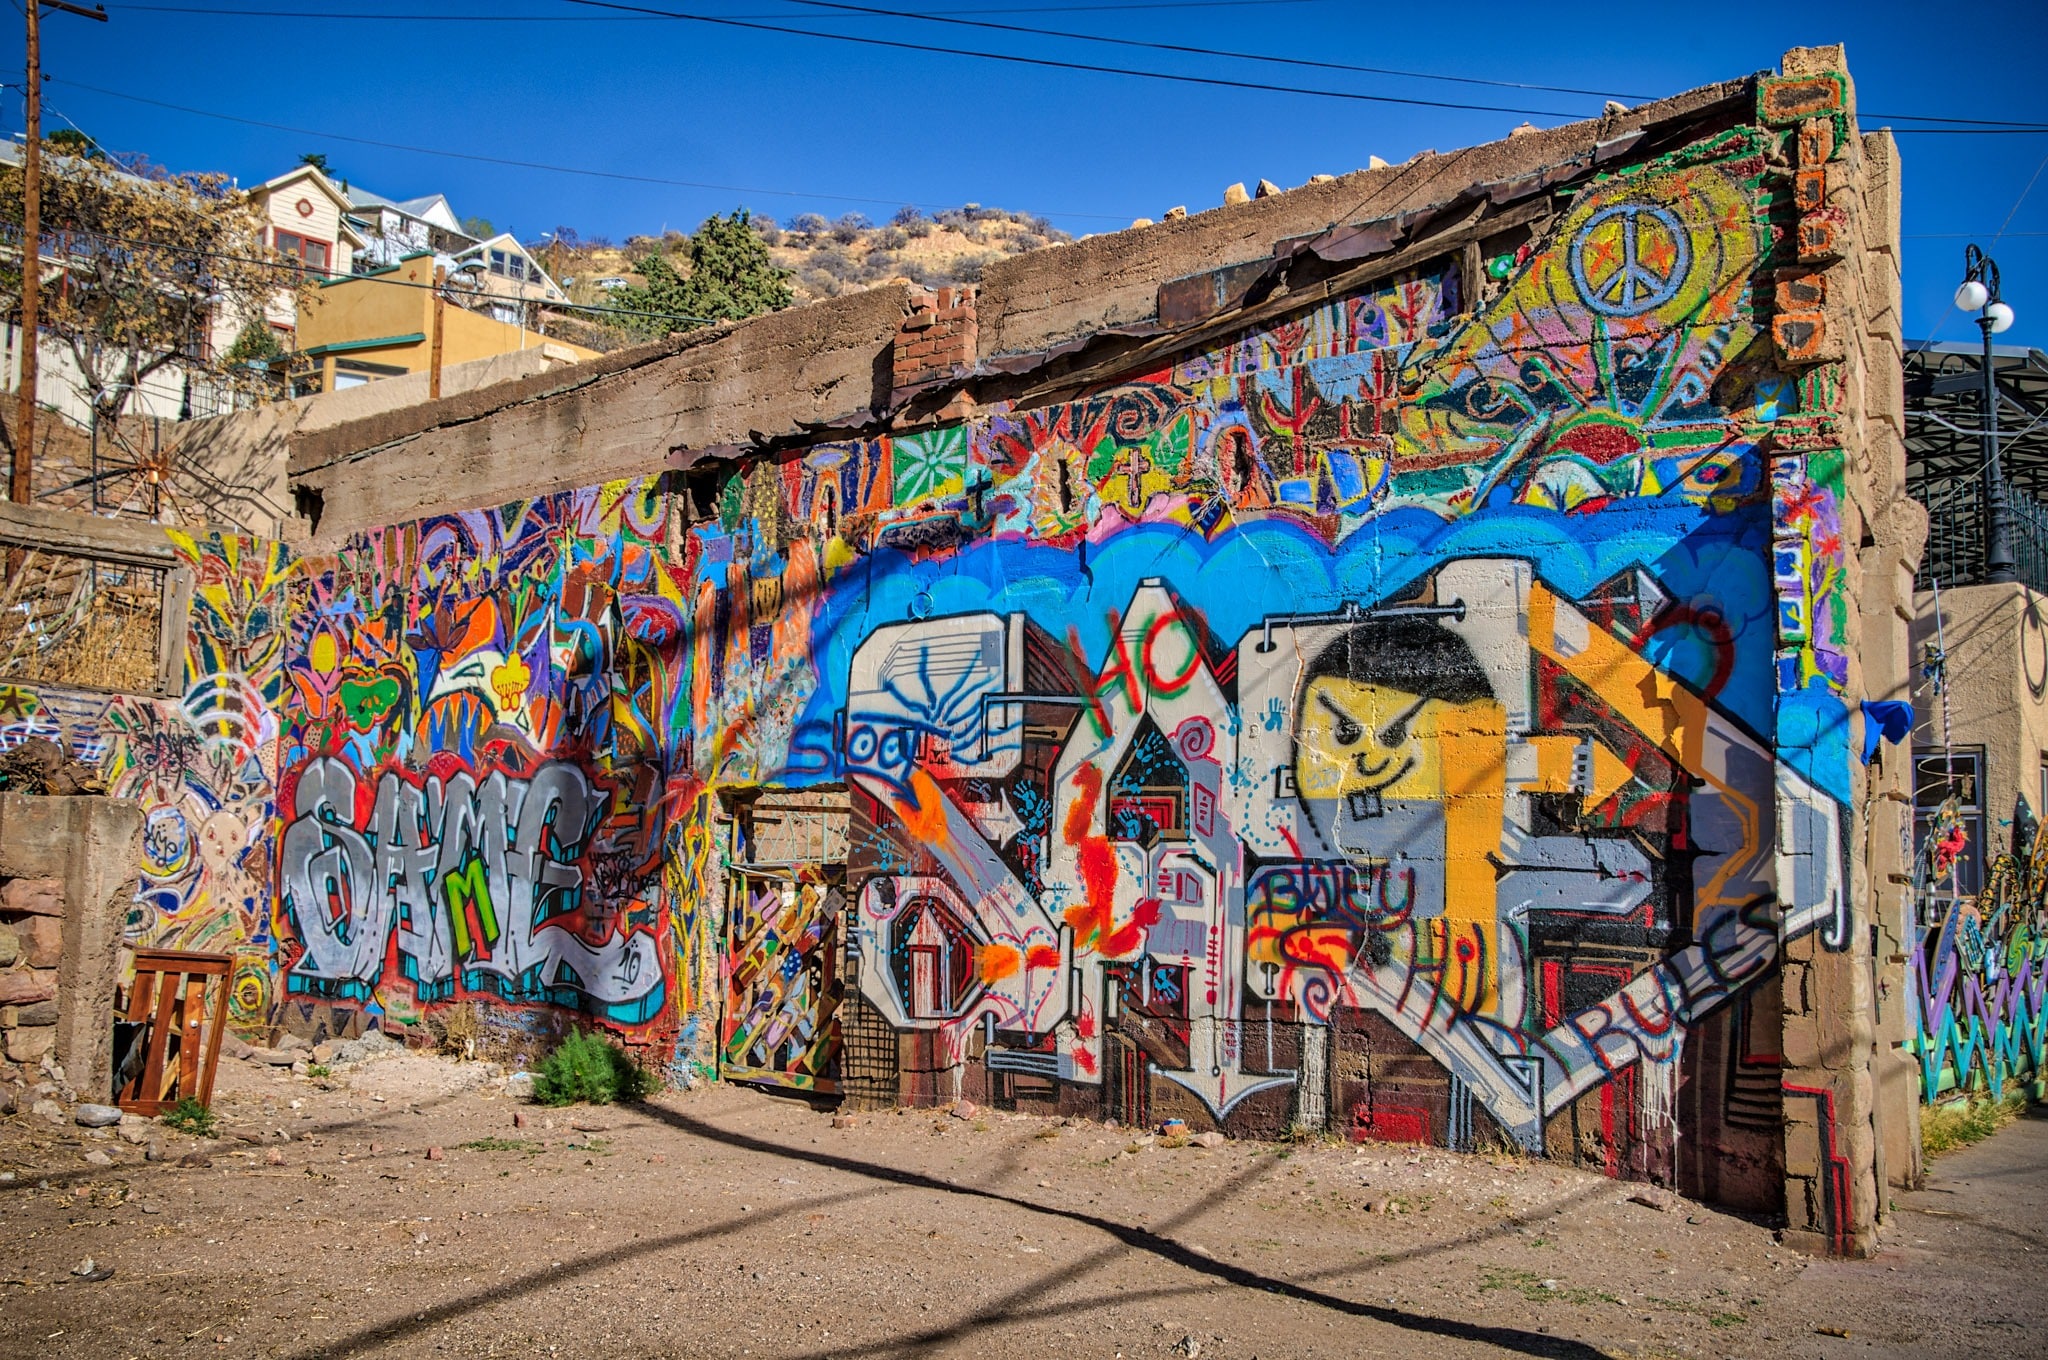 This colorful and intricate graffiti adorn a wall of a ruined building on Brewery Street in Bisbee, Arizona.